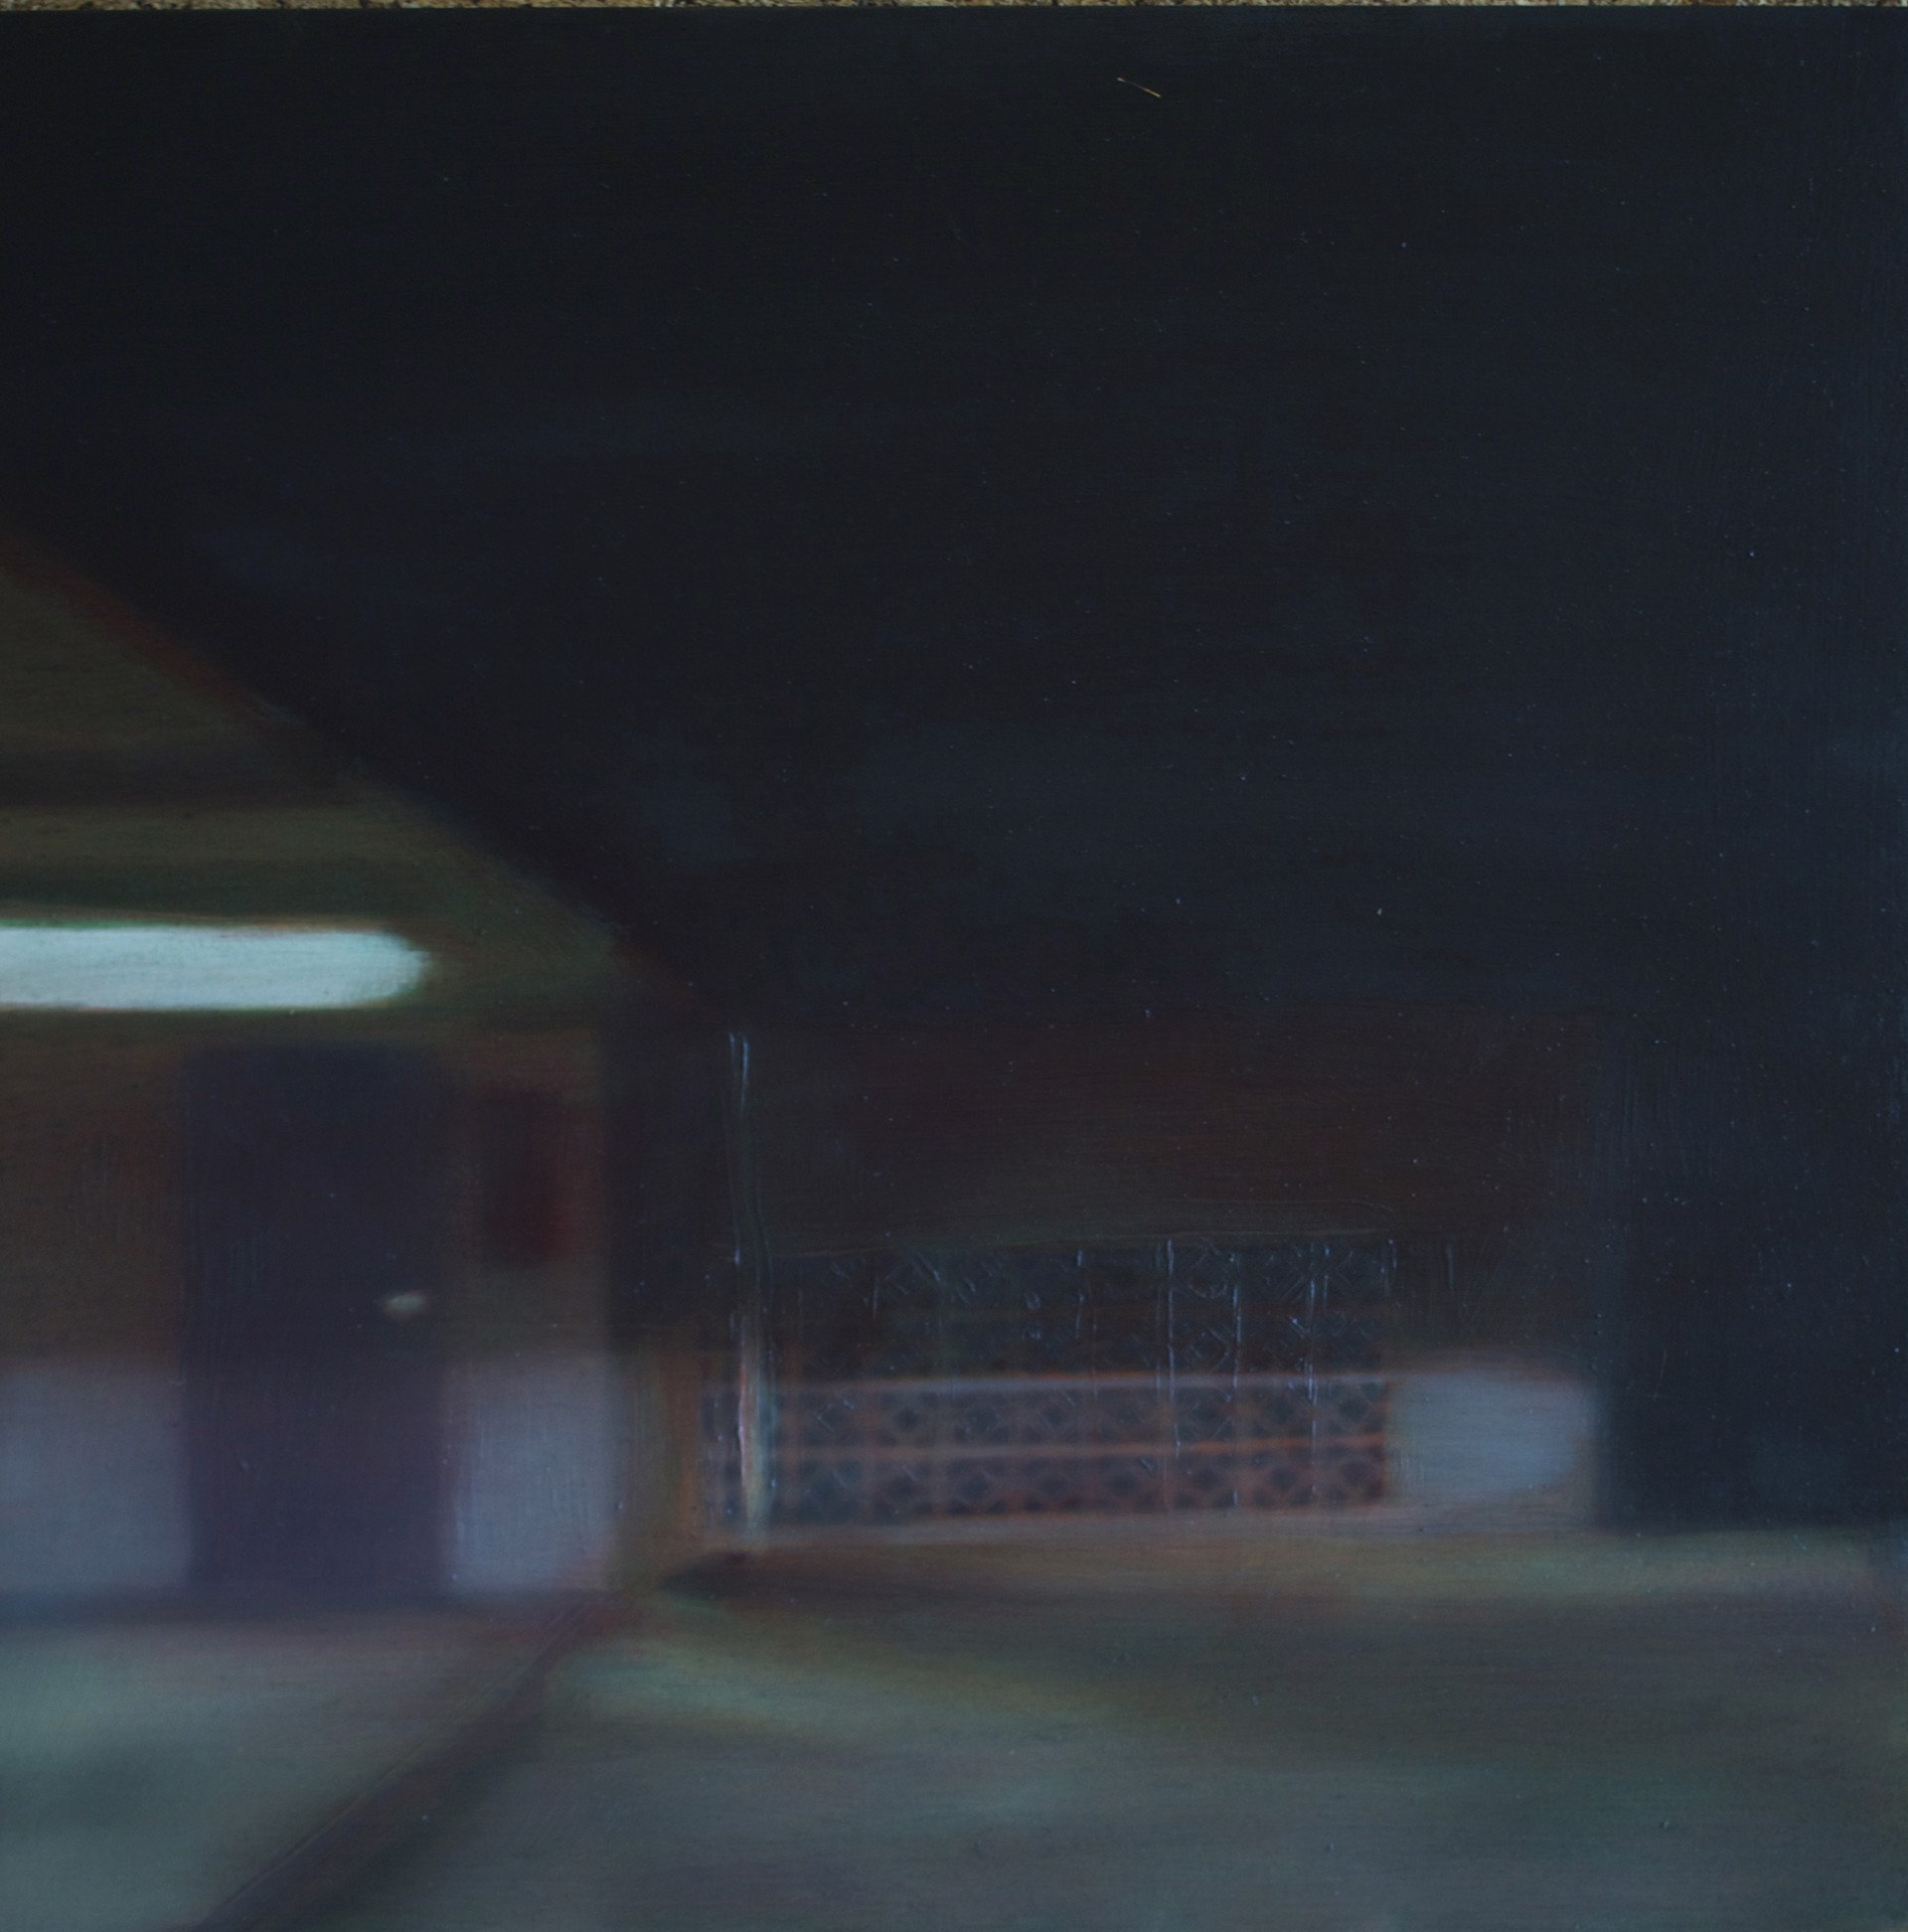 Nocturne (Downy Motel with Headlights and Breezeblocks) by Keith Crowley